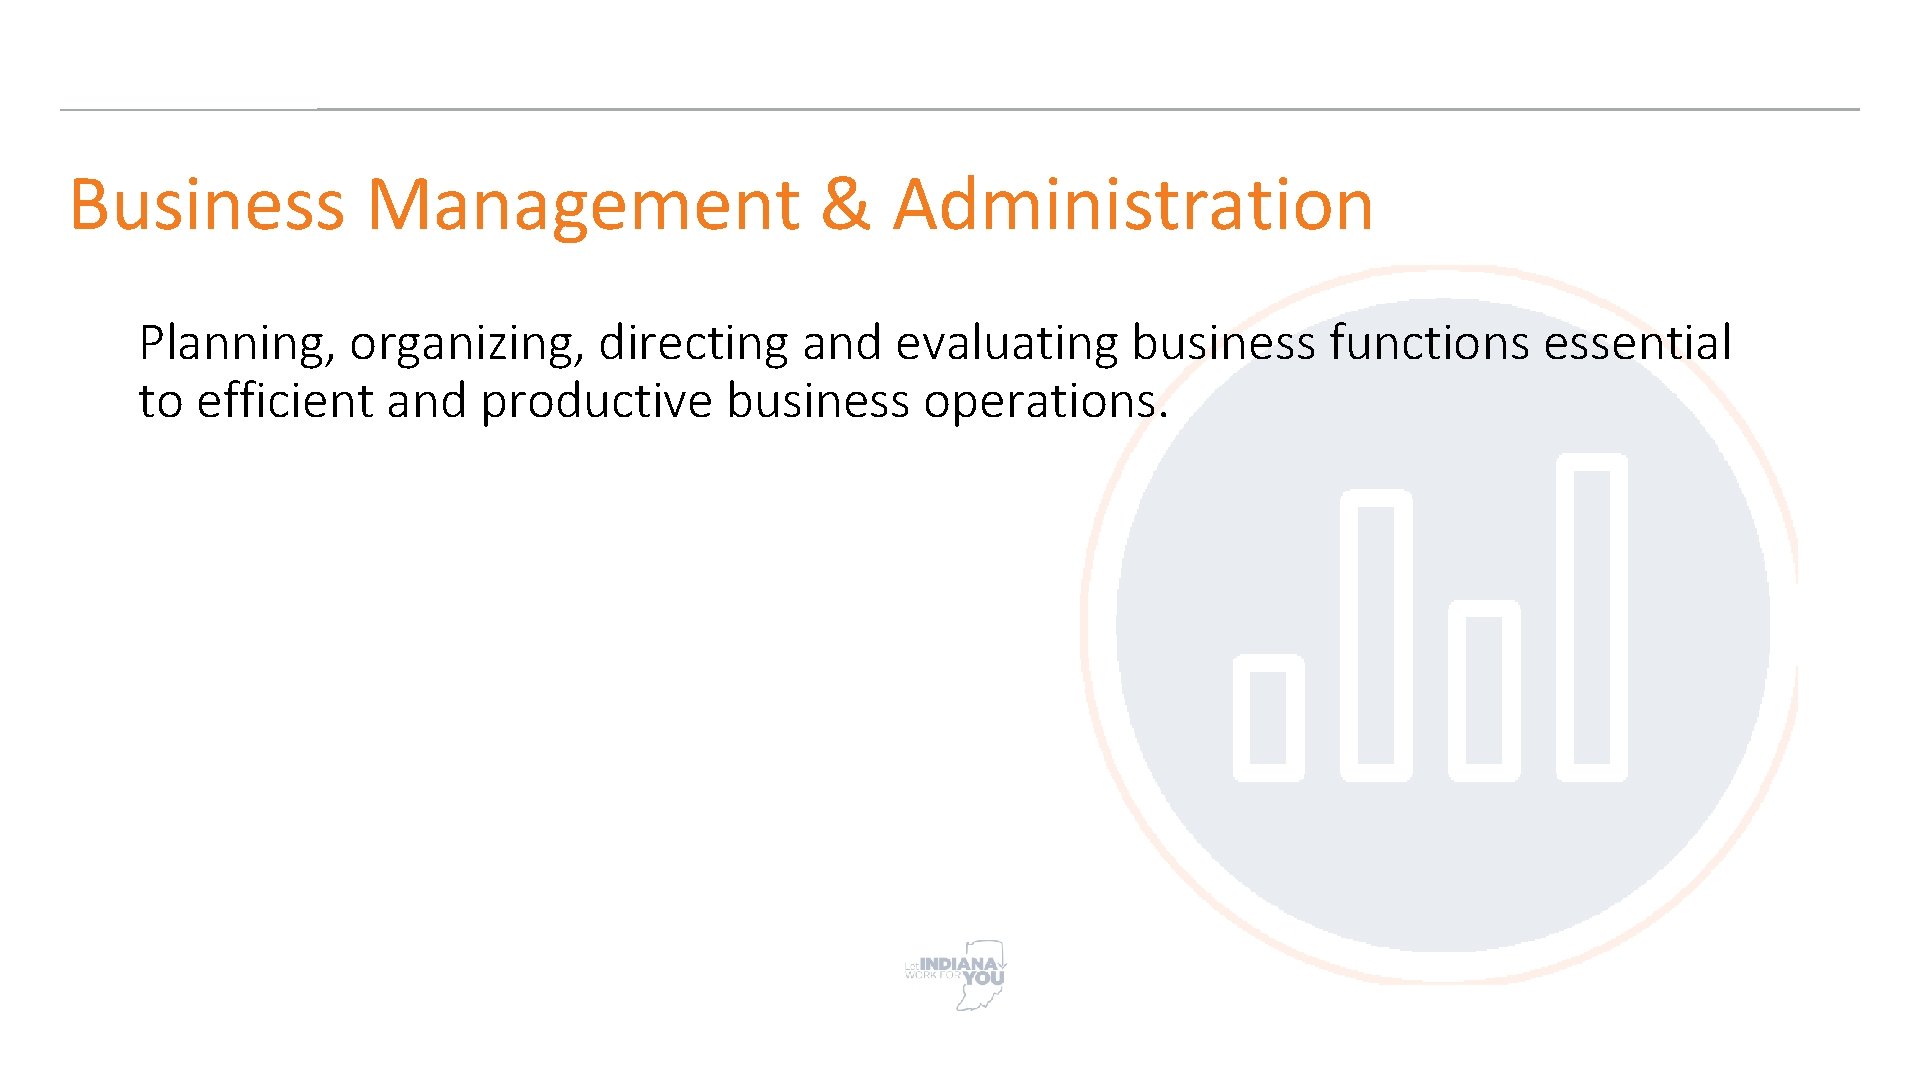 Business Management & Administration Planning, organizing, directing and evaluating business functions essential to efficient